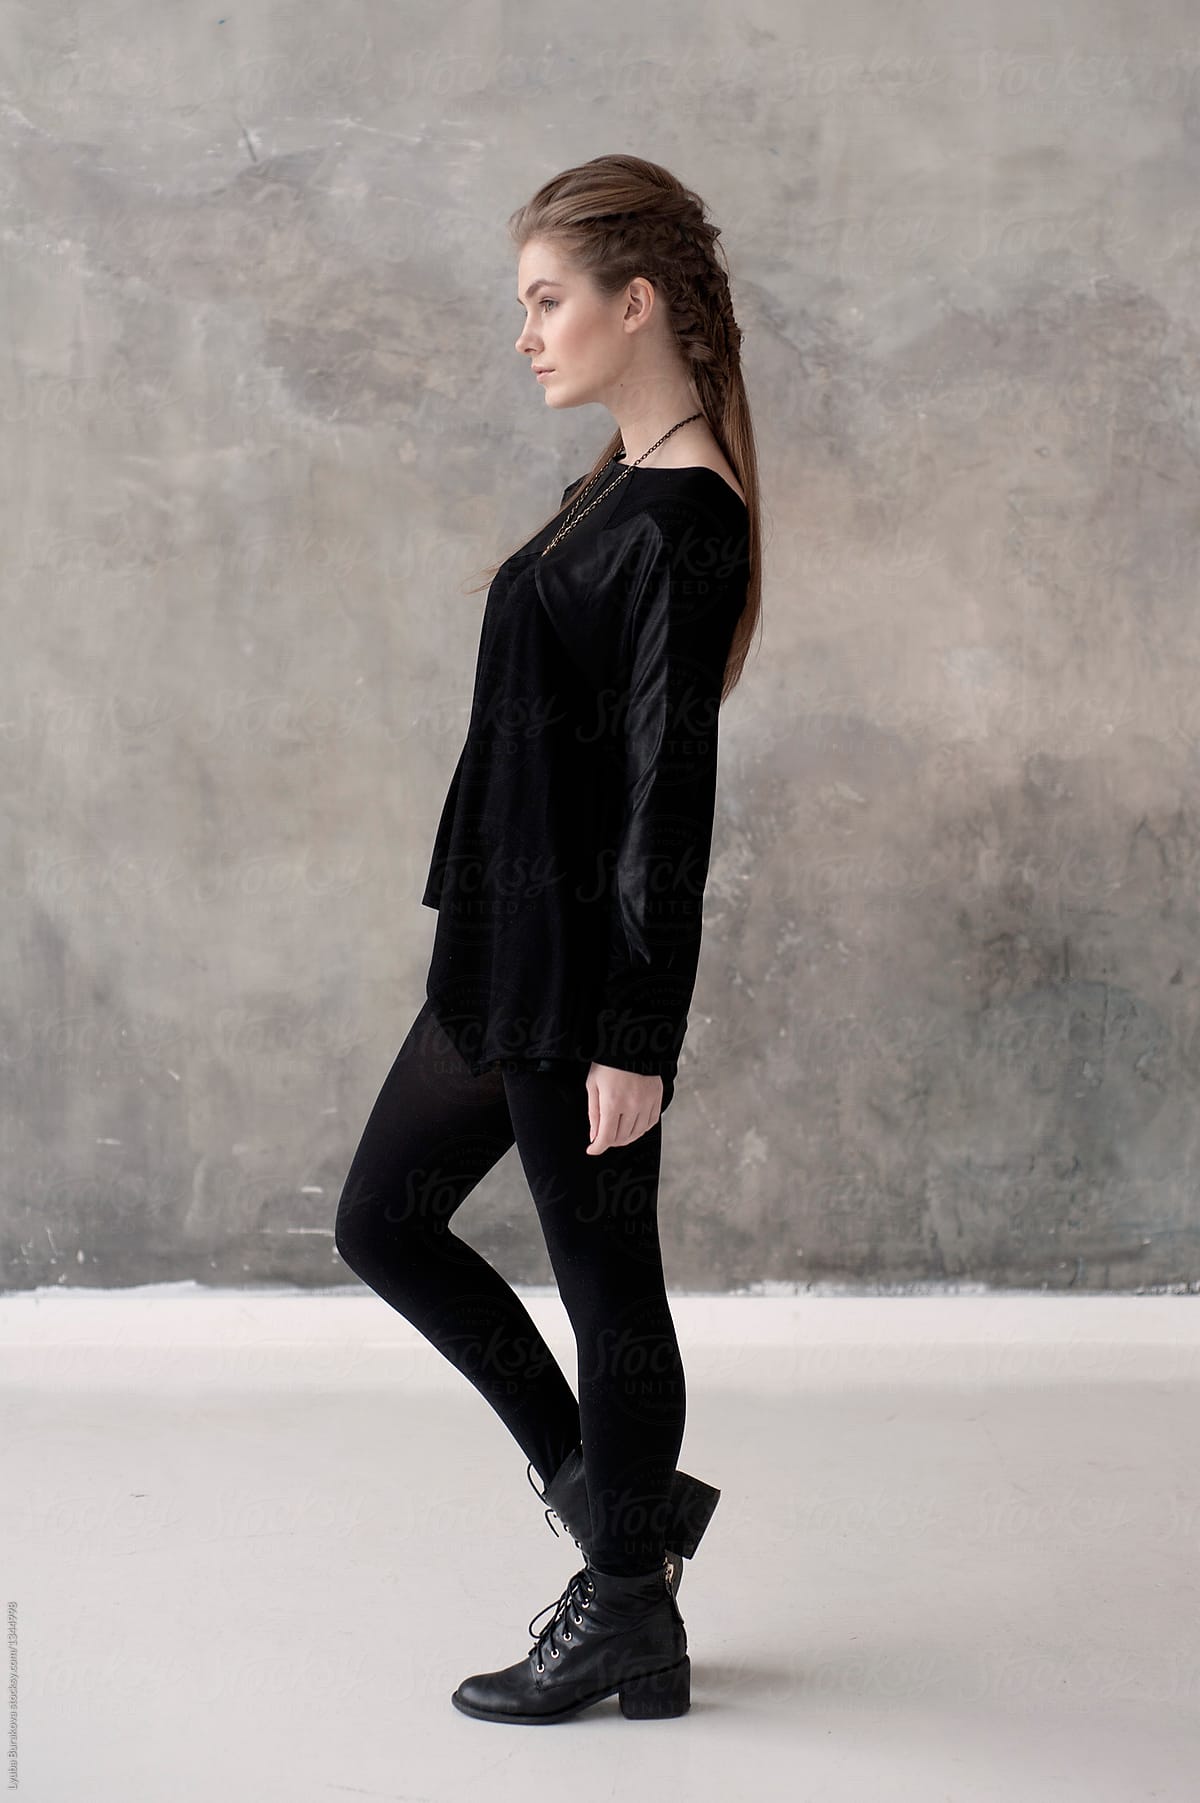 Young woman wearing black stylish outfit